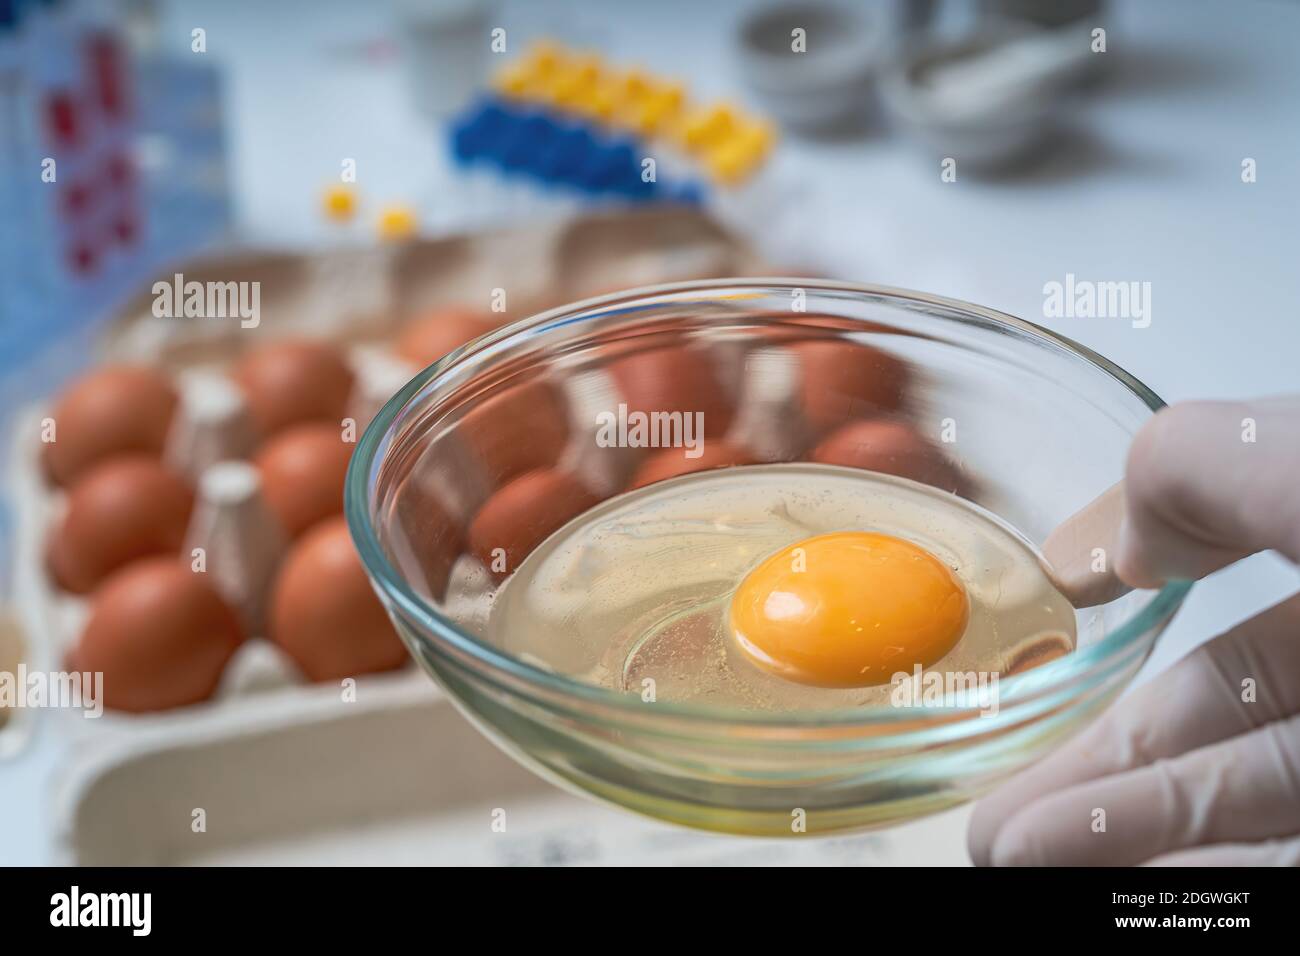 Scientist holds bowl with yolk. Food quality control concept. Stock Photo